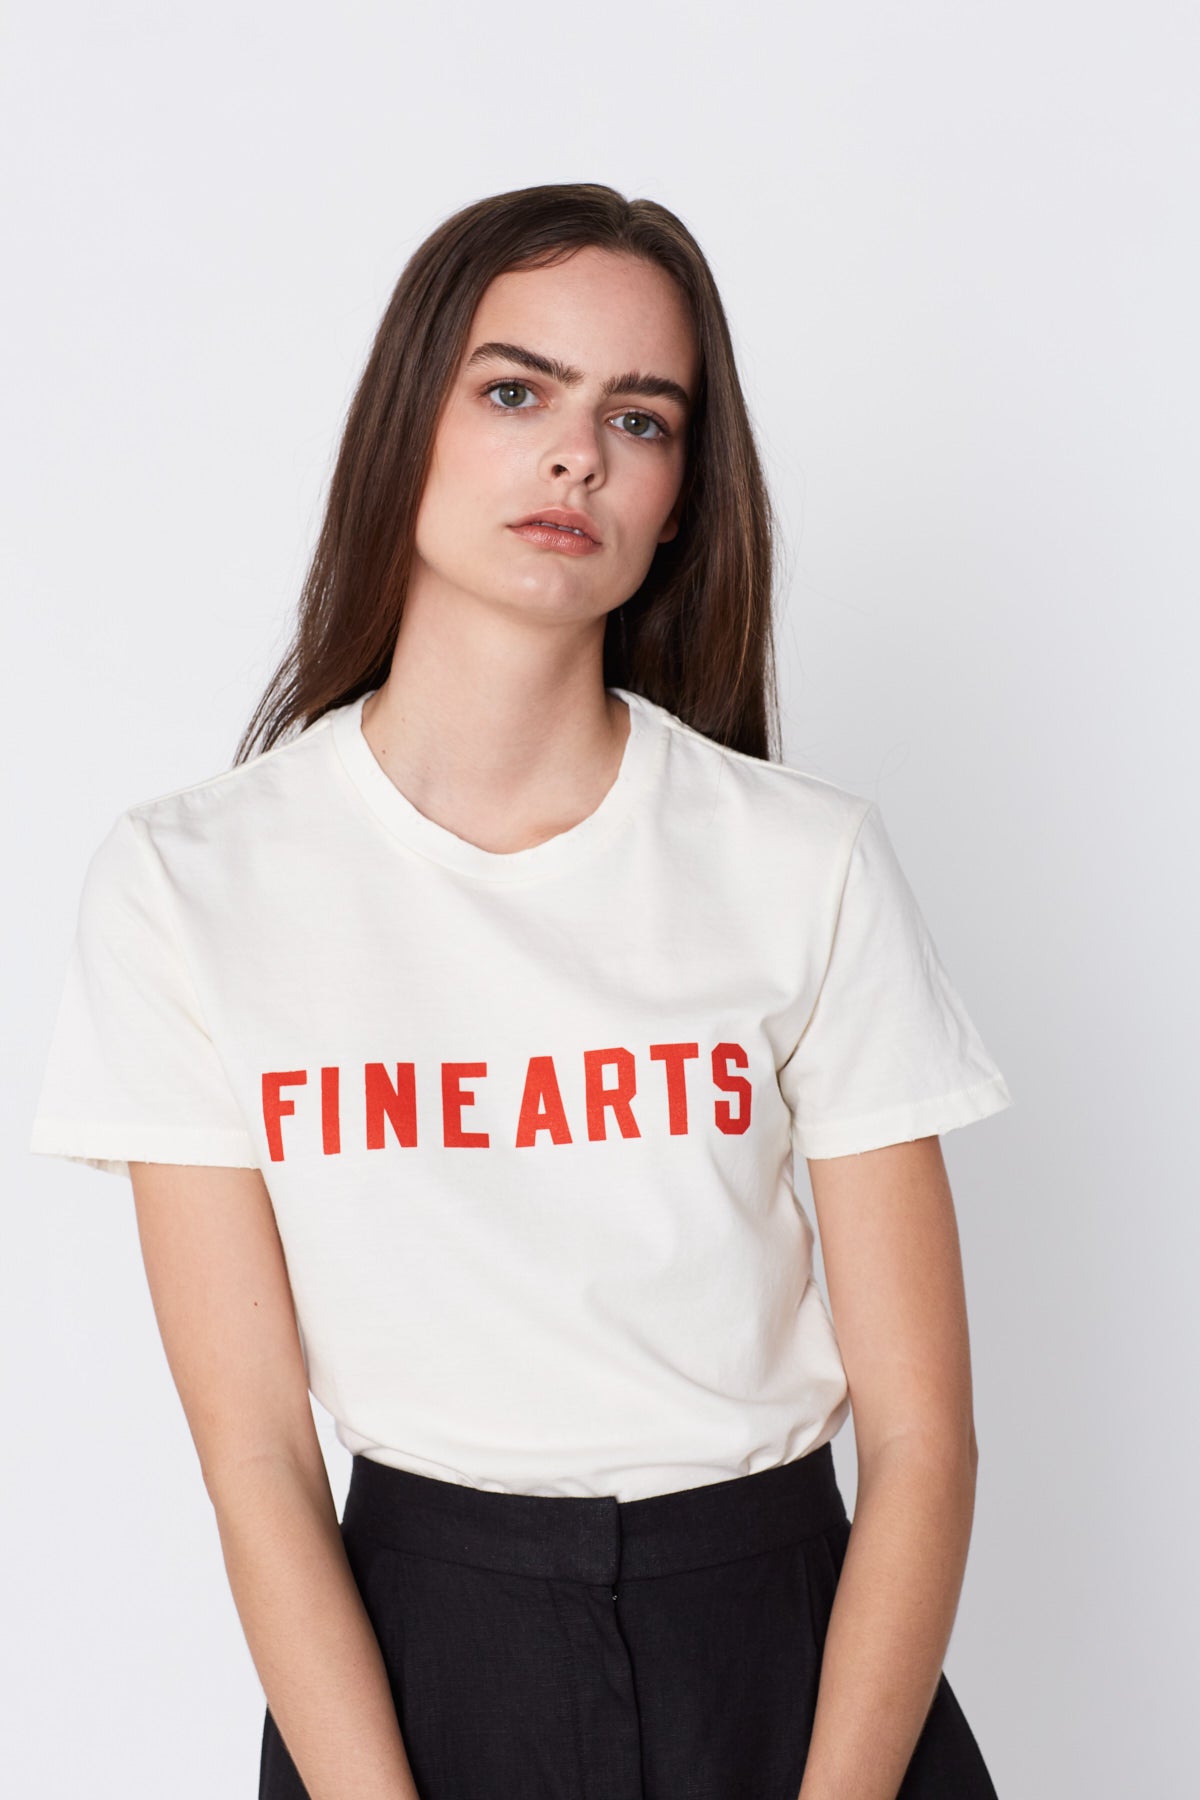 Fine Arts Cotton T-shirt in White with Red. Made in Atlanta, ethically and sustainably, by slow fashion designer Megan Huntz. 